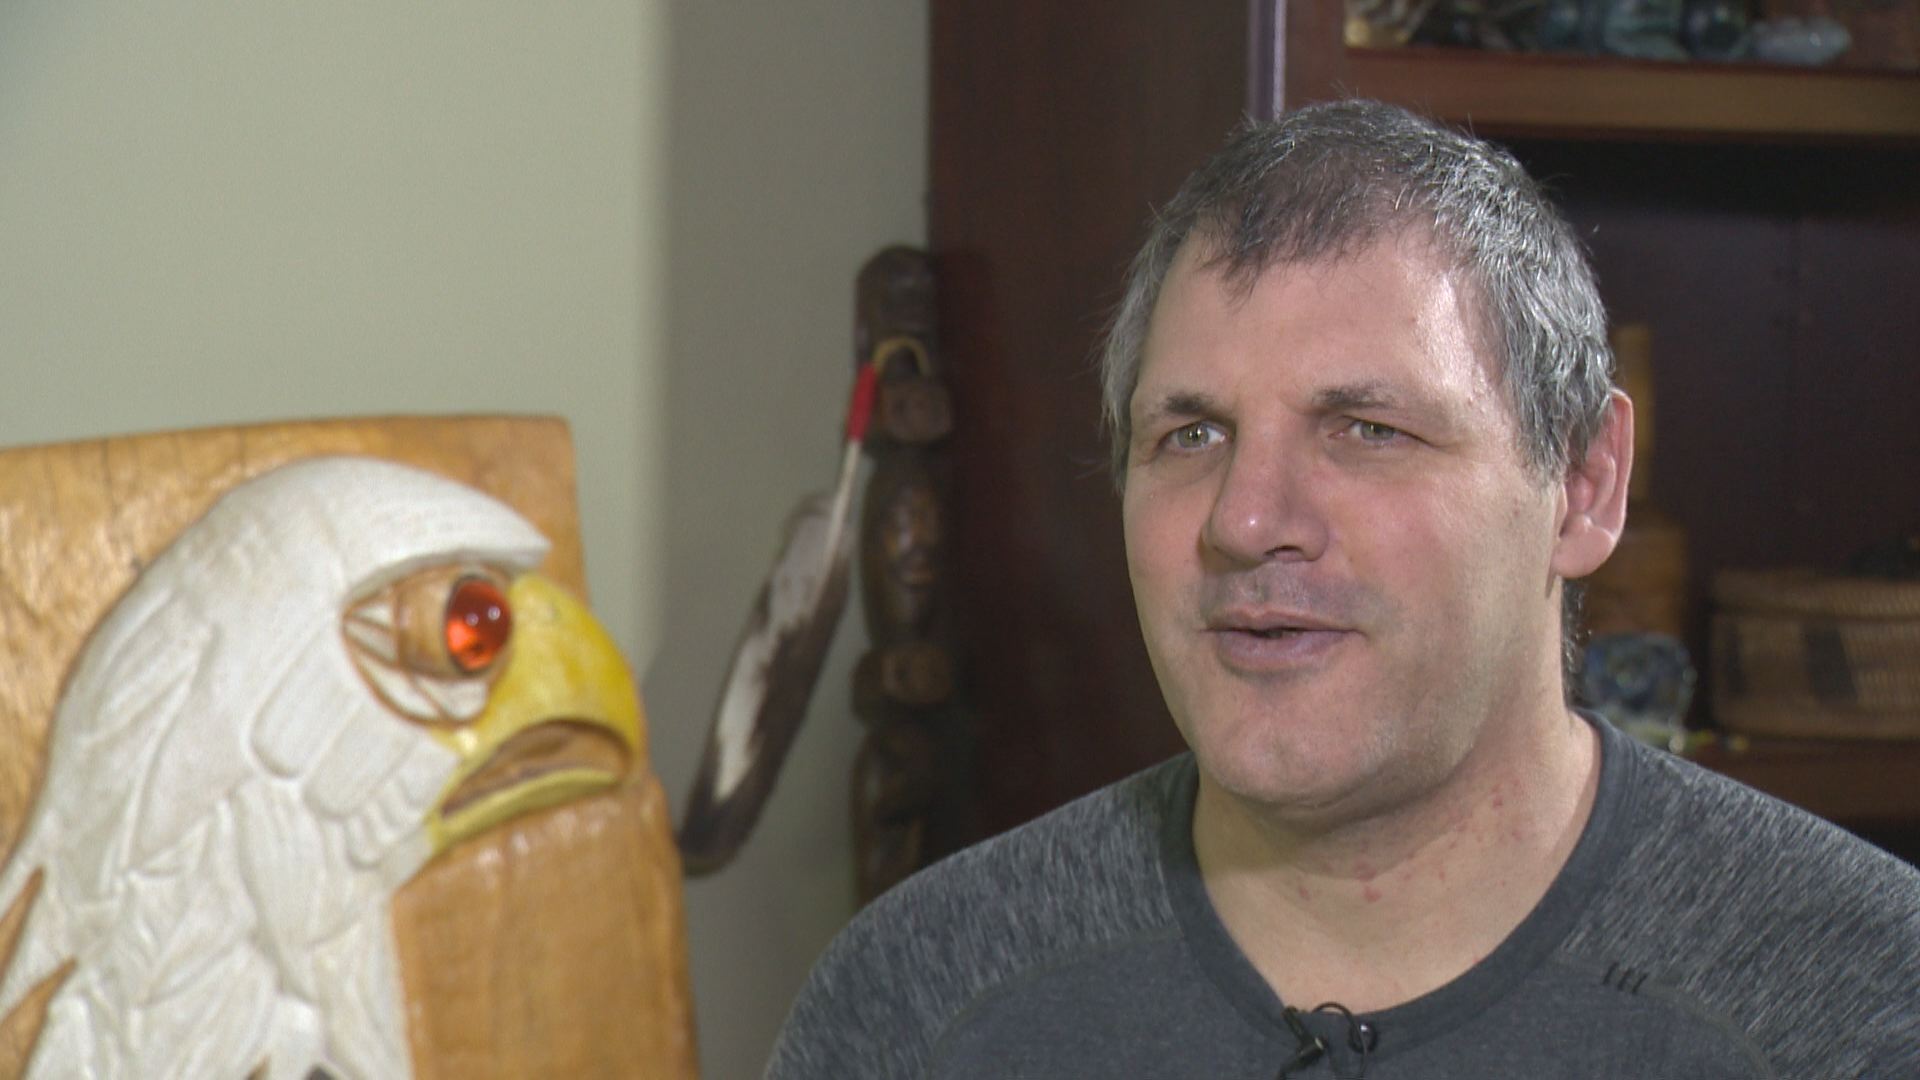 Gino Odjick opens up on battle with rare disease Amyloidosis - CanucksArmy